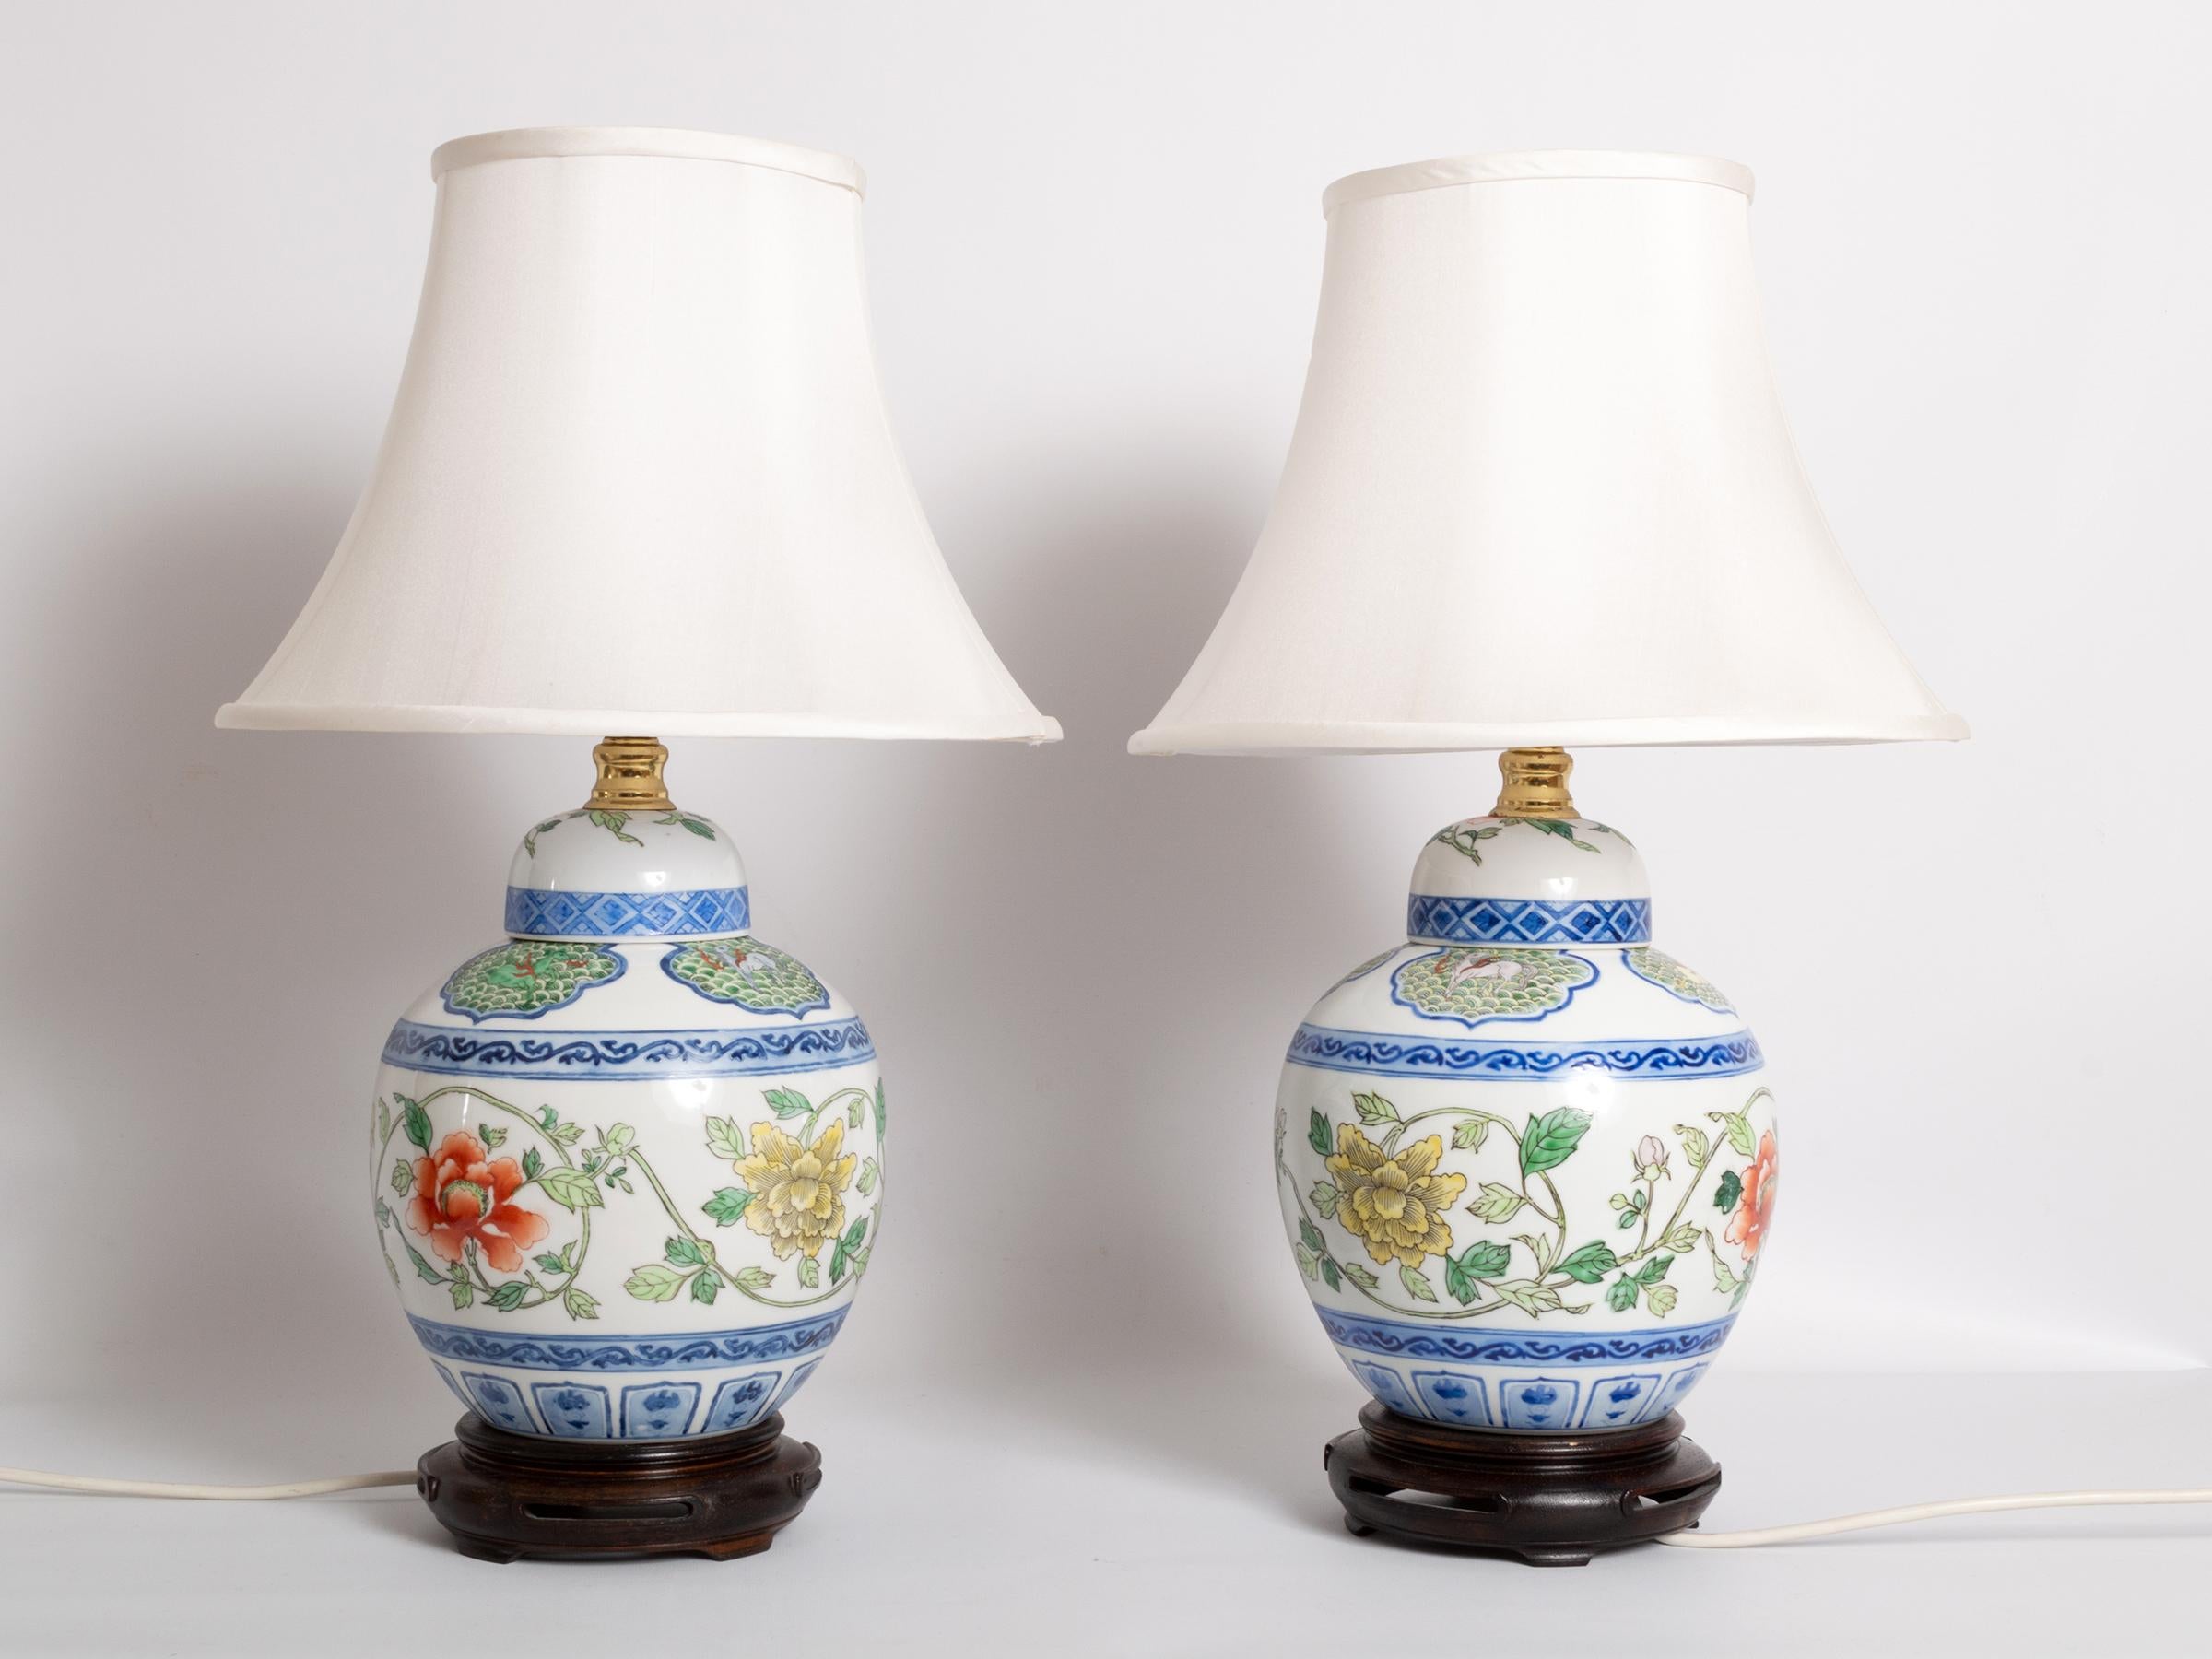 A pair of Maitland Smith hand painted porcelain Chinese ginger jar table lamps, Hong Kong, circa 1970.
The lamps are accompanied by their original silk shades.
In excellent vintage condition.
  